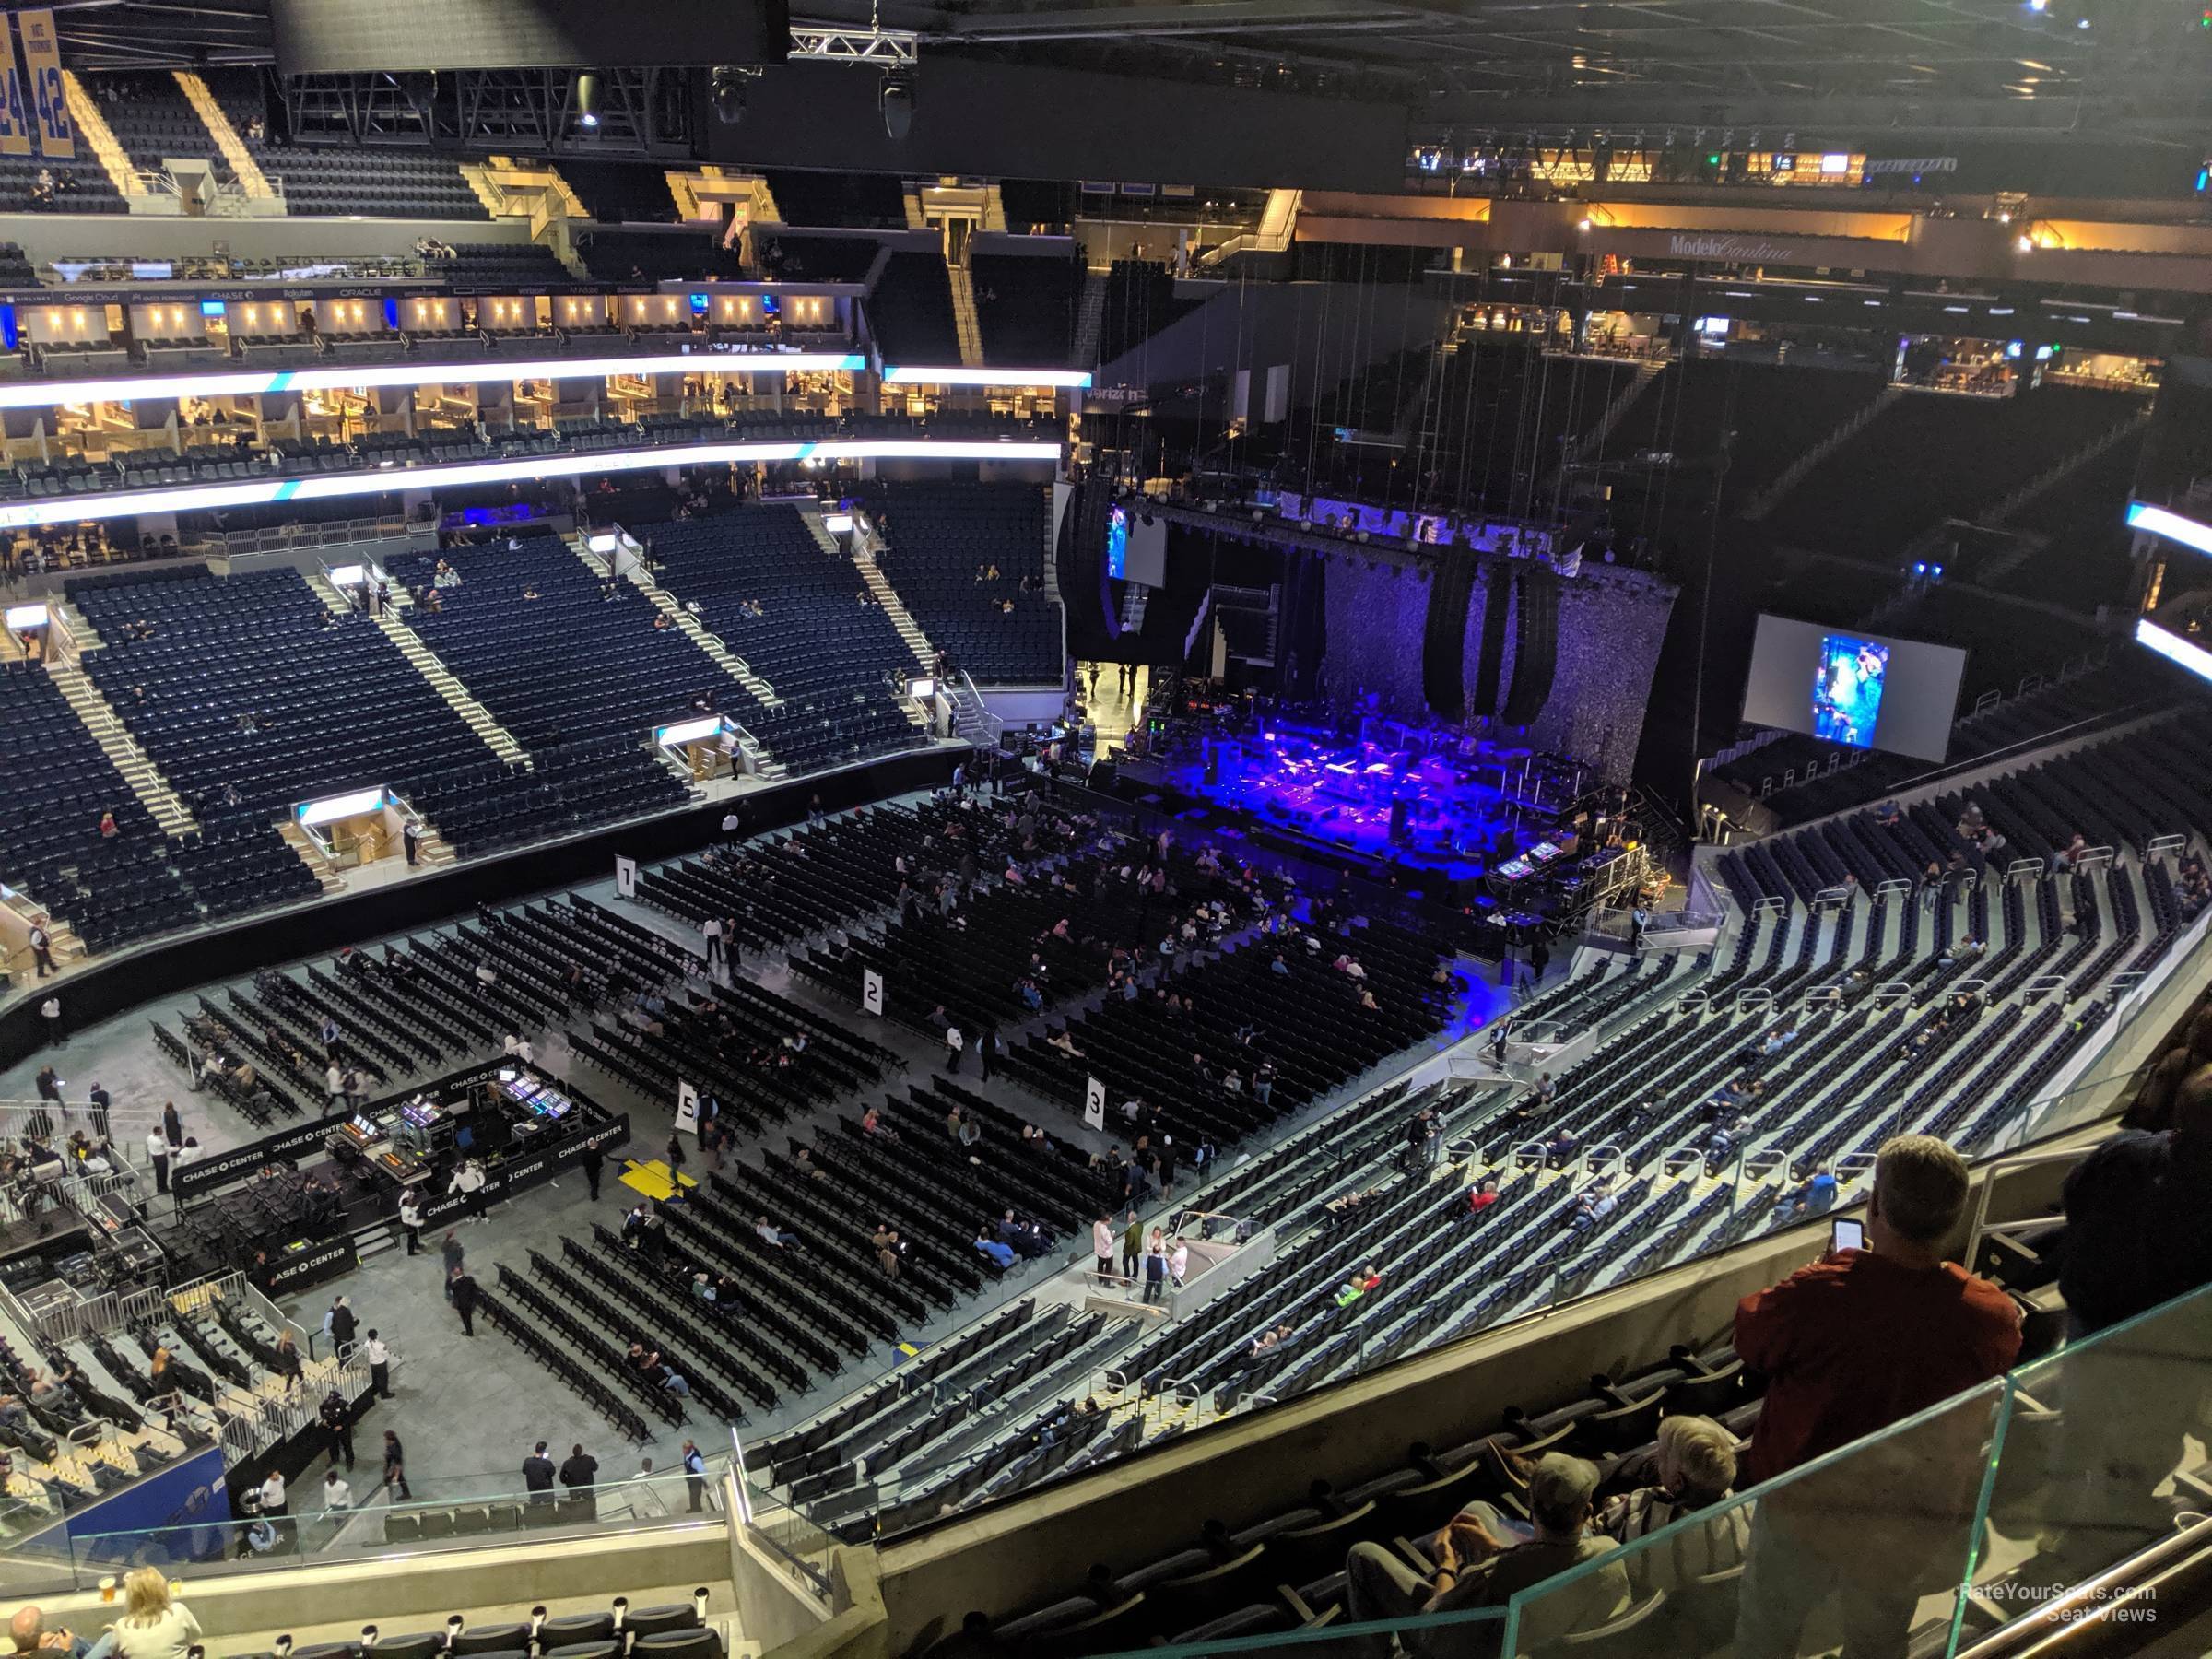 Chase Center Concert Seating Chart